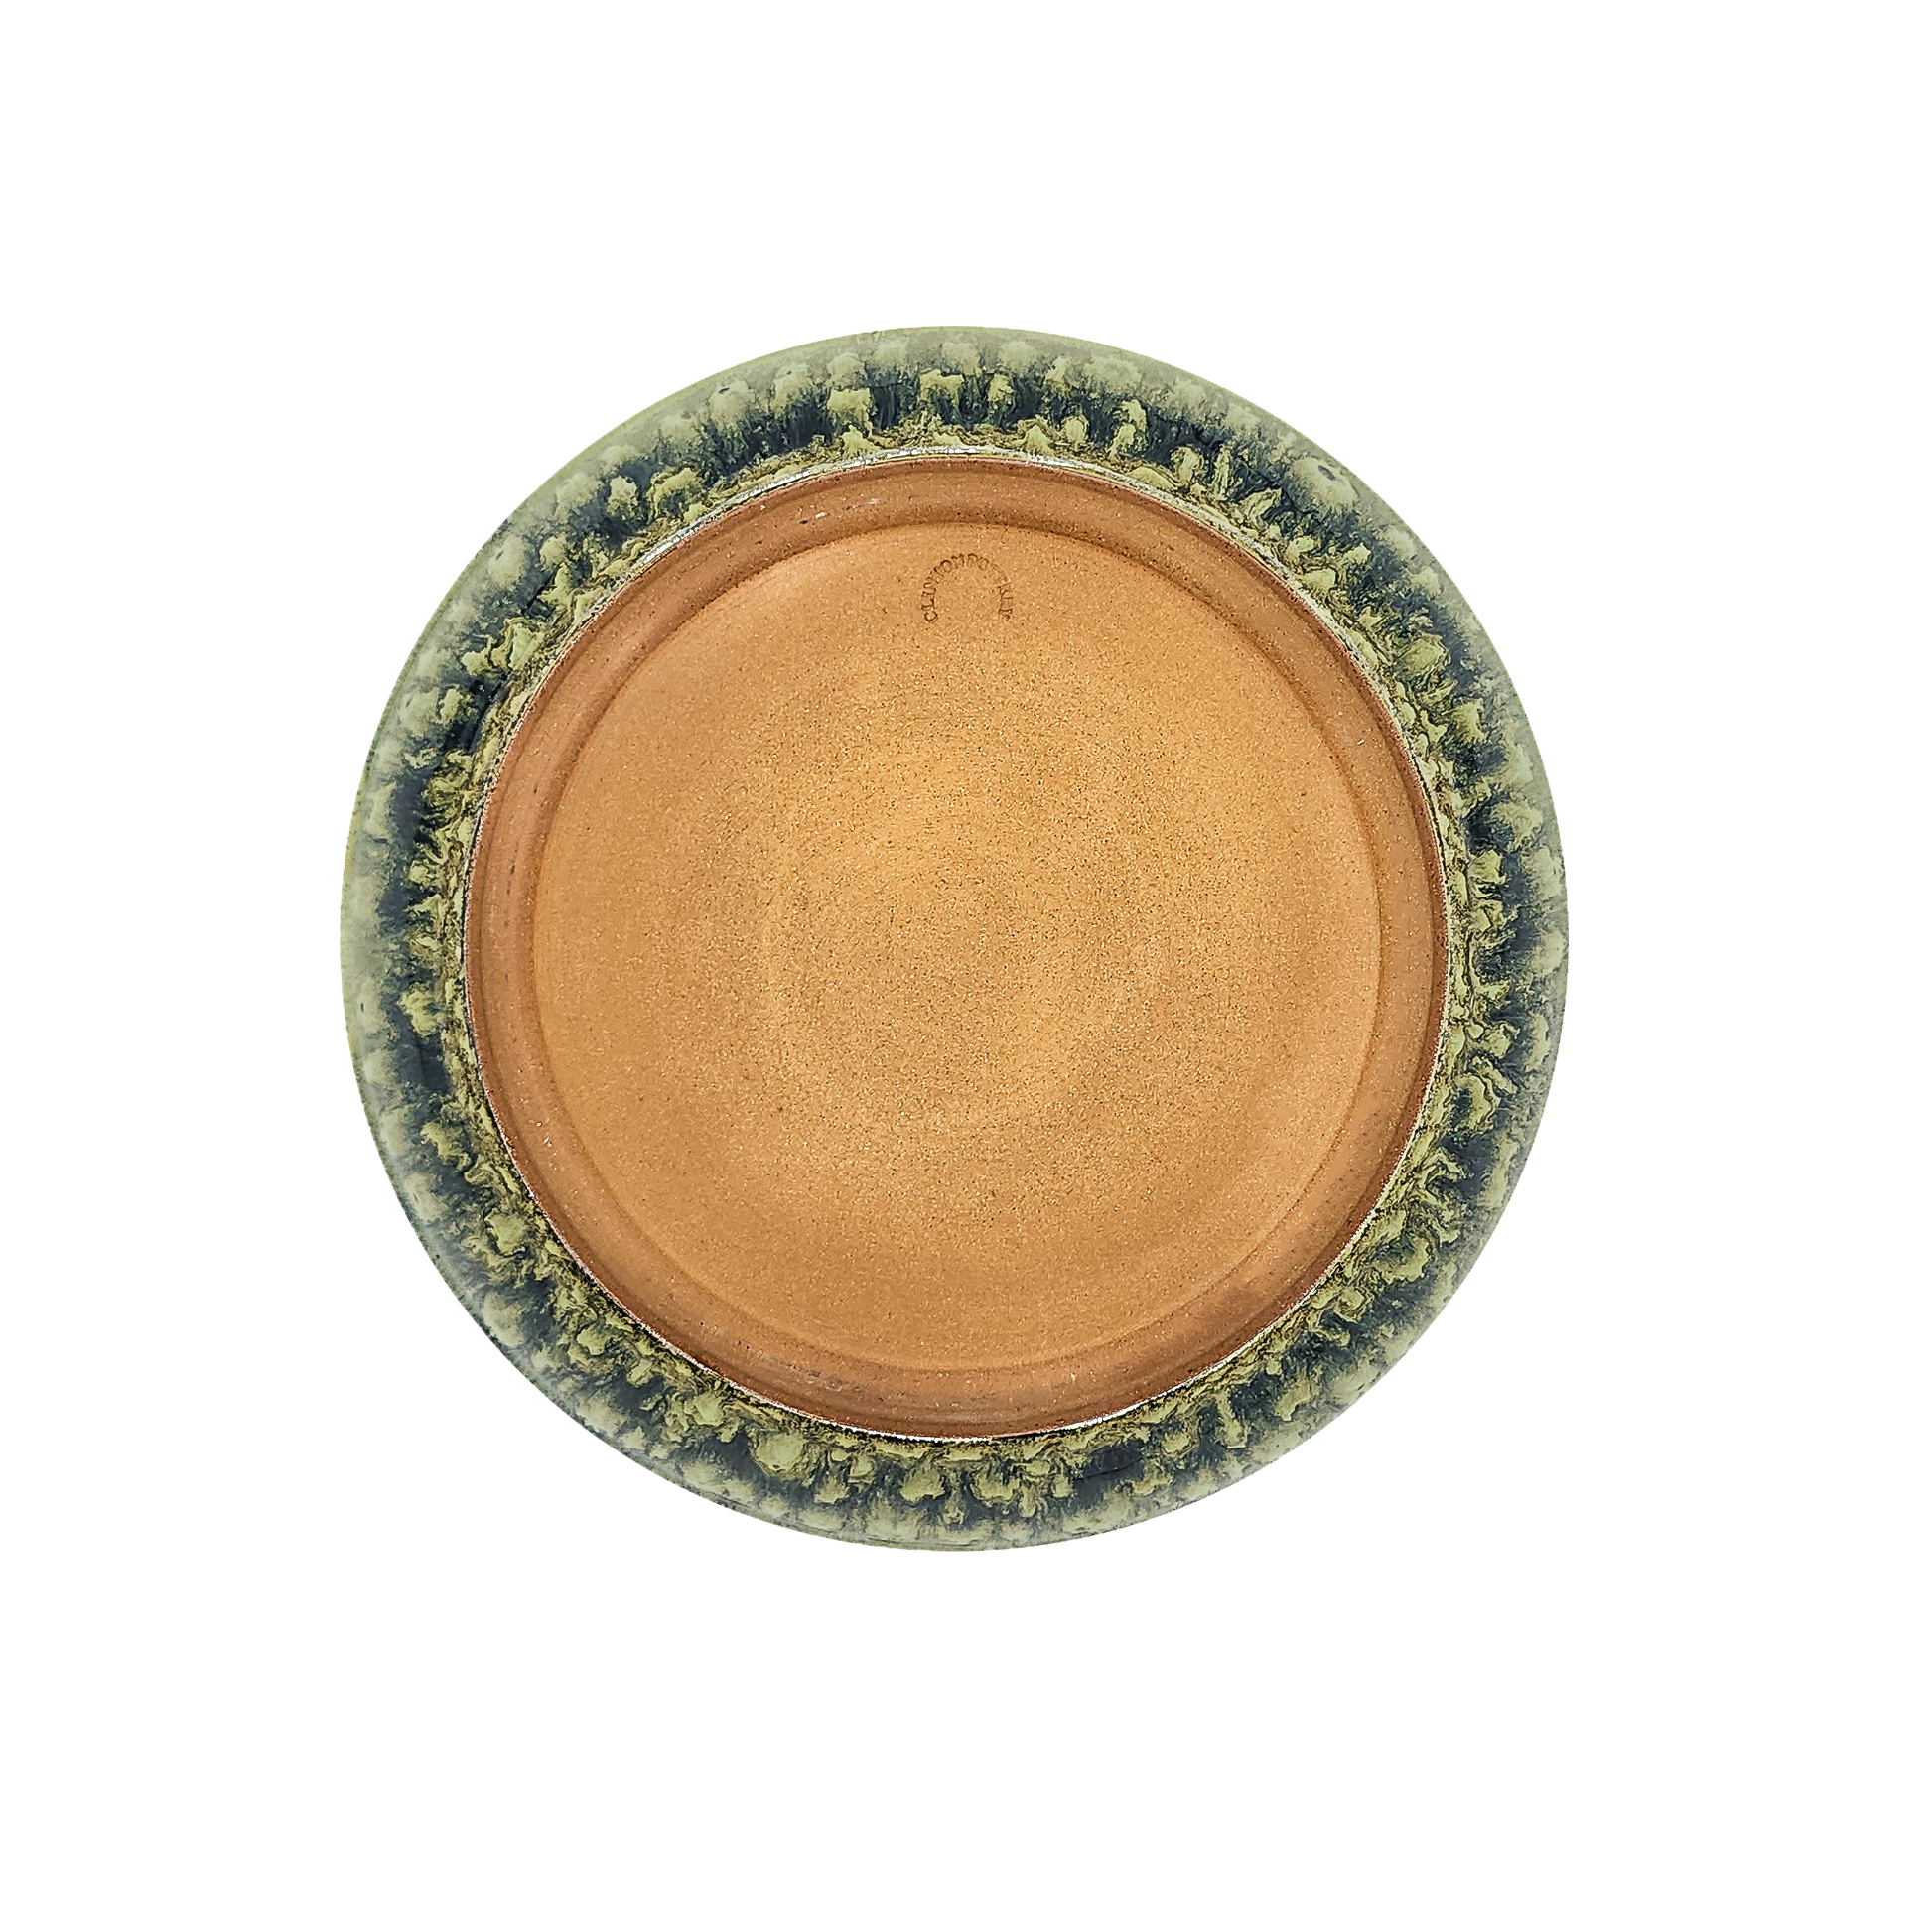 Image: A Froggy Bottom glazed pasta dish, measuring 10 inches in diameter, crafted by Clinton Pottery. This earthy green hue resembles the tranquil depths of a pond, offering ample space for serving your favorite pasta dishes with rustic charm and style.